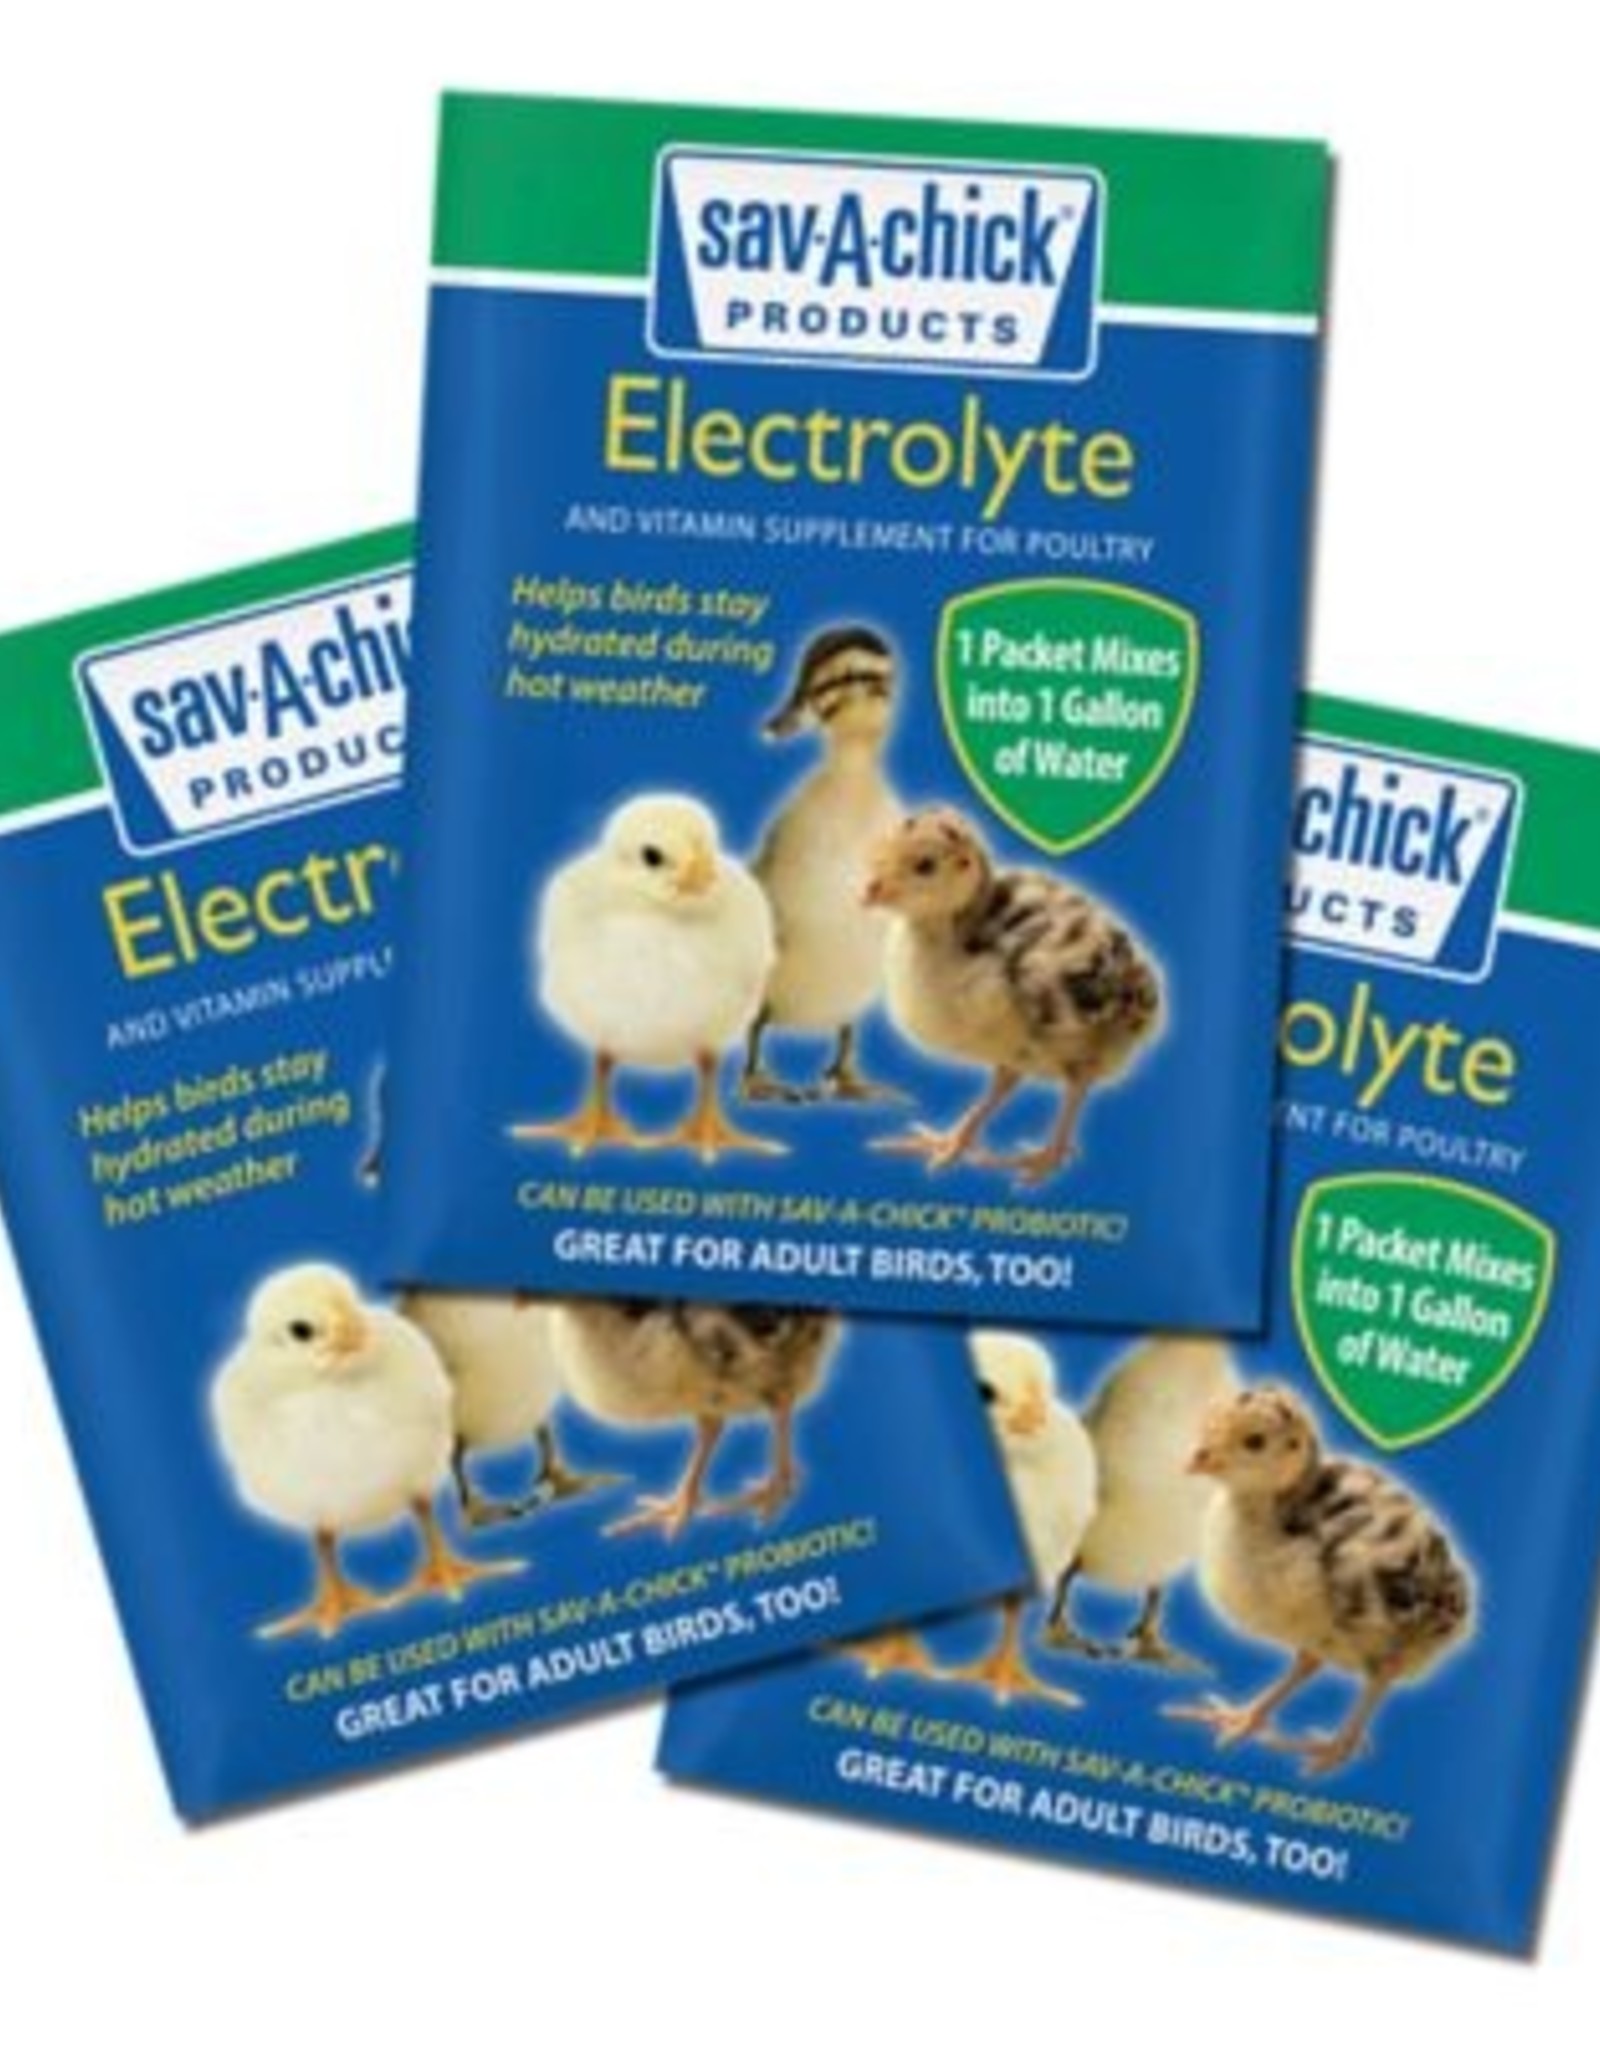 MILK PRODUCTS SAV-A-CHICK ELECTROLYTE & VITAMIN SUPPLEMENT